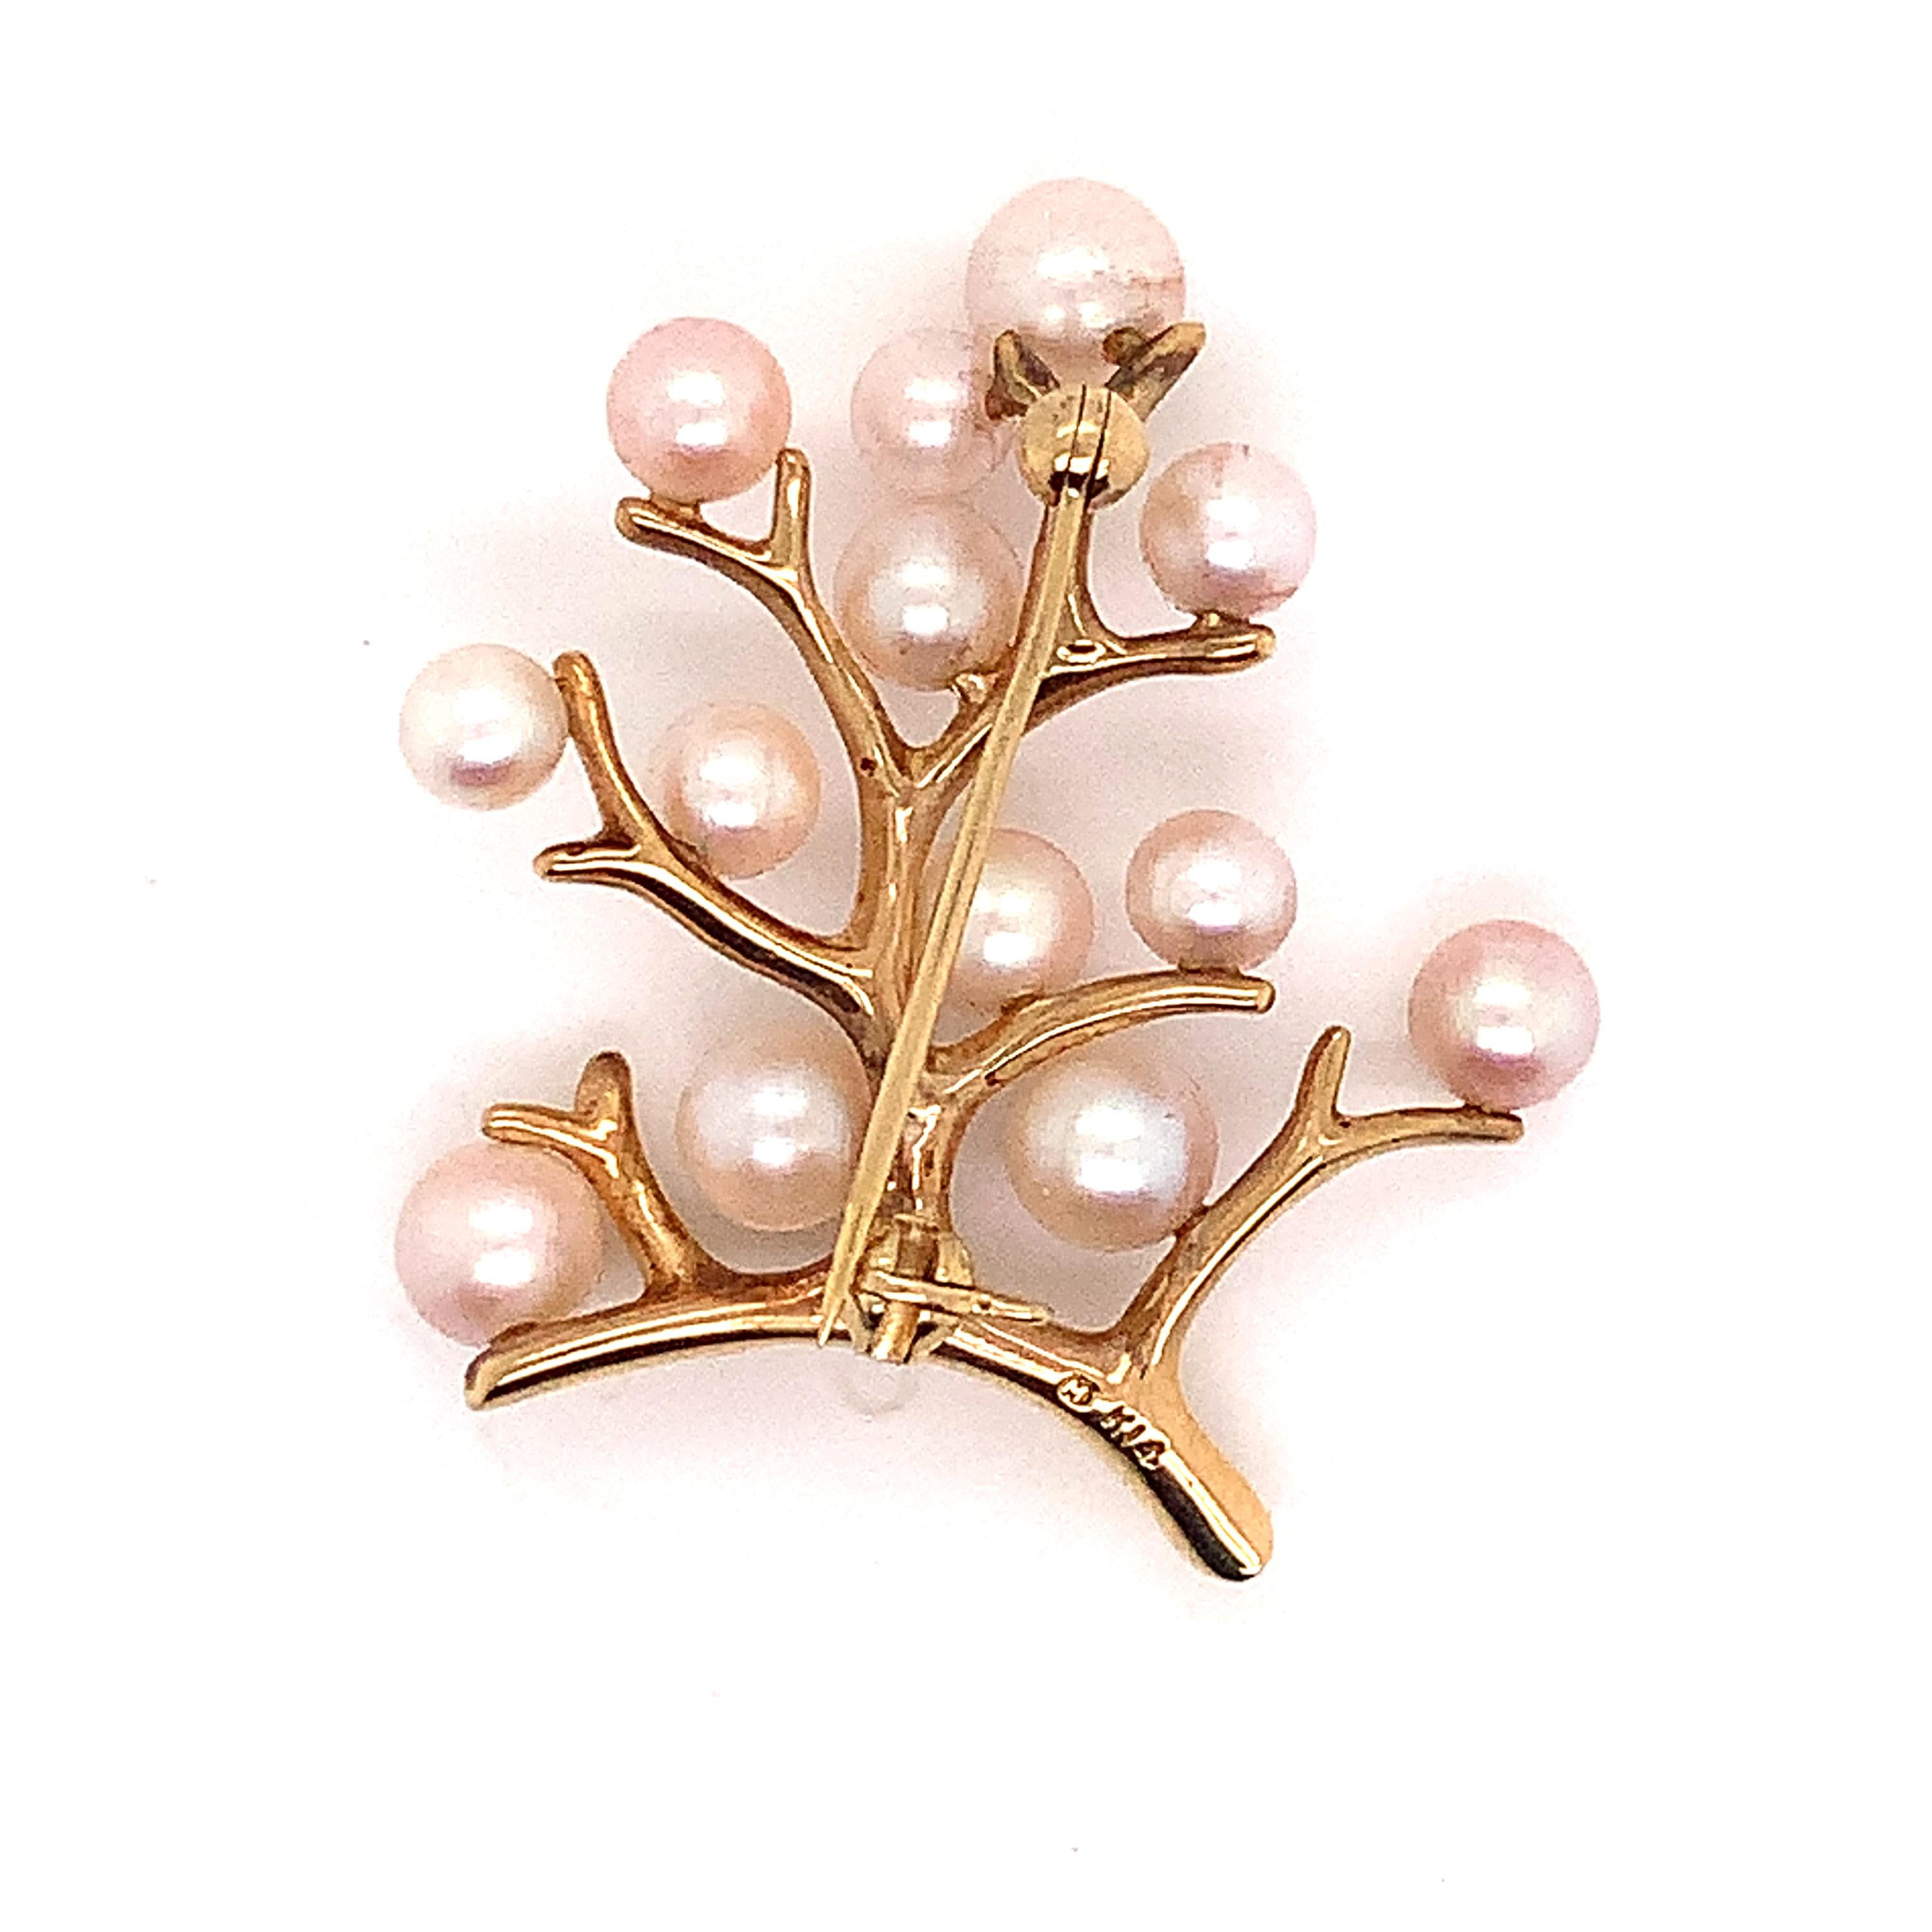 Mikimoto Estate Akoya Pearl Tree of Life Brooch Pin 14k Gold 5.4mm M189  

This elegant Authentic Mikimoto Estate 14k gold brooch pin has 13 Saltwater Akoya Cultured Pearls ranging in size from 4.4 - 5.4 mm with a weight of 5.95 Grams.

TRUSTED